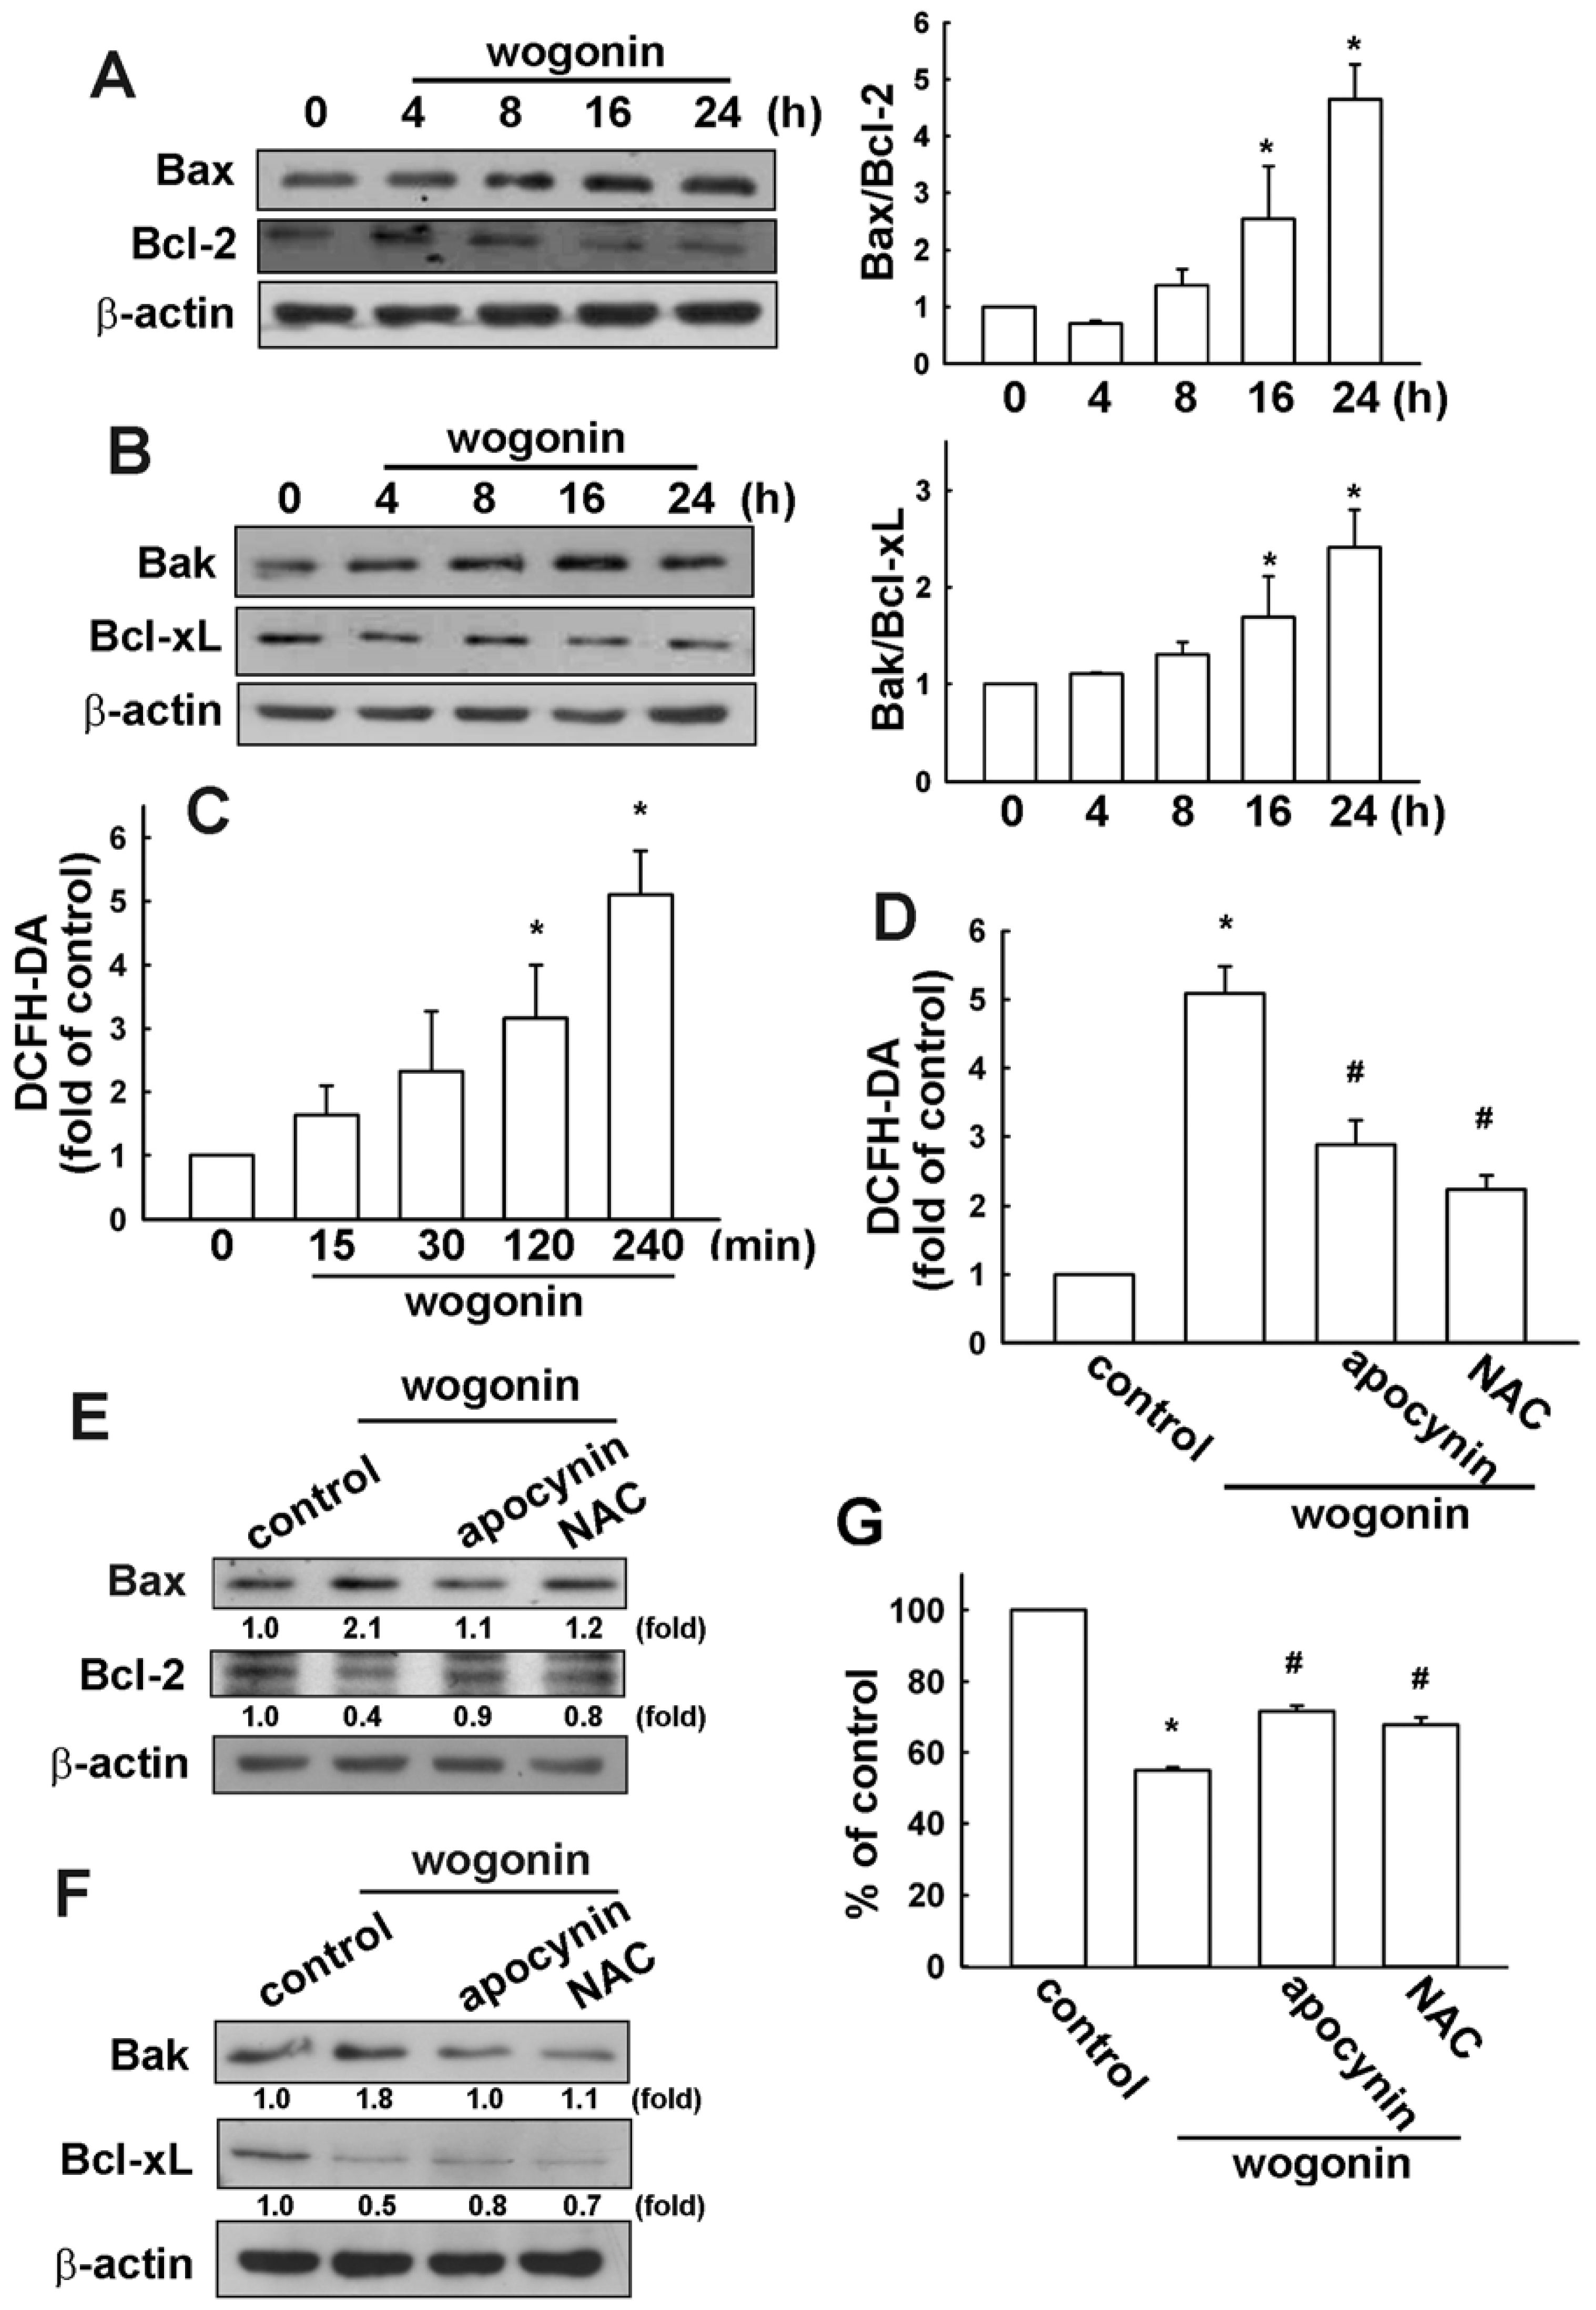 IJMS | Free Full-Text | Wogonin Induces Reactive Oxygen Species Production  and Cell Apoptosis in Human Glioma Cancer Cells